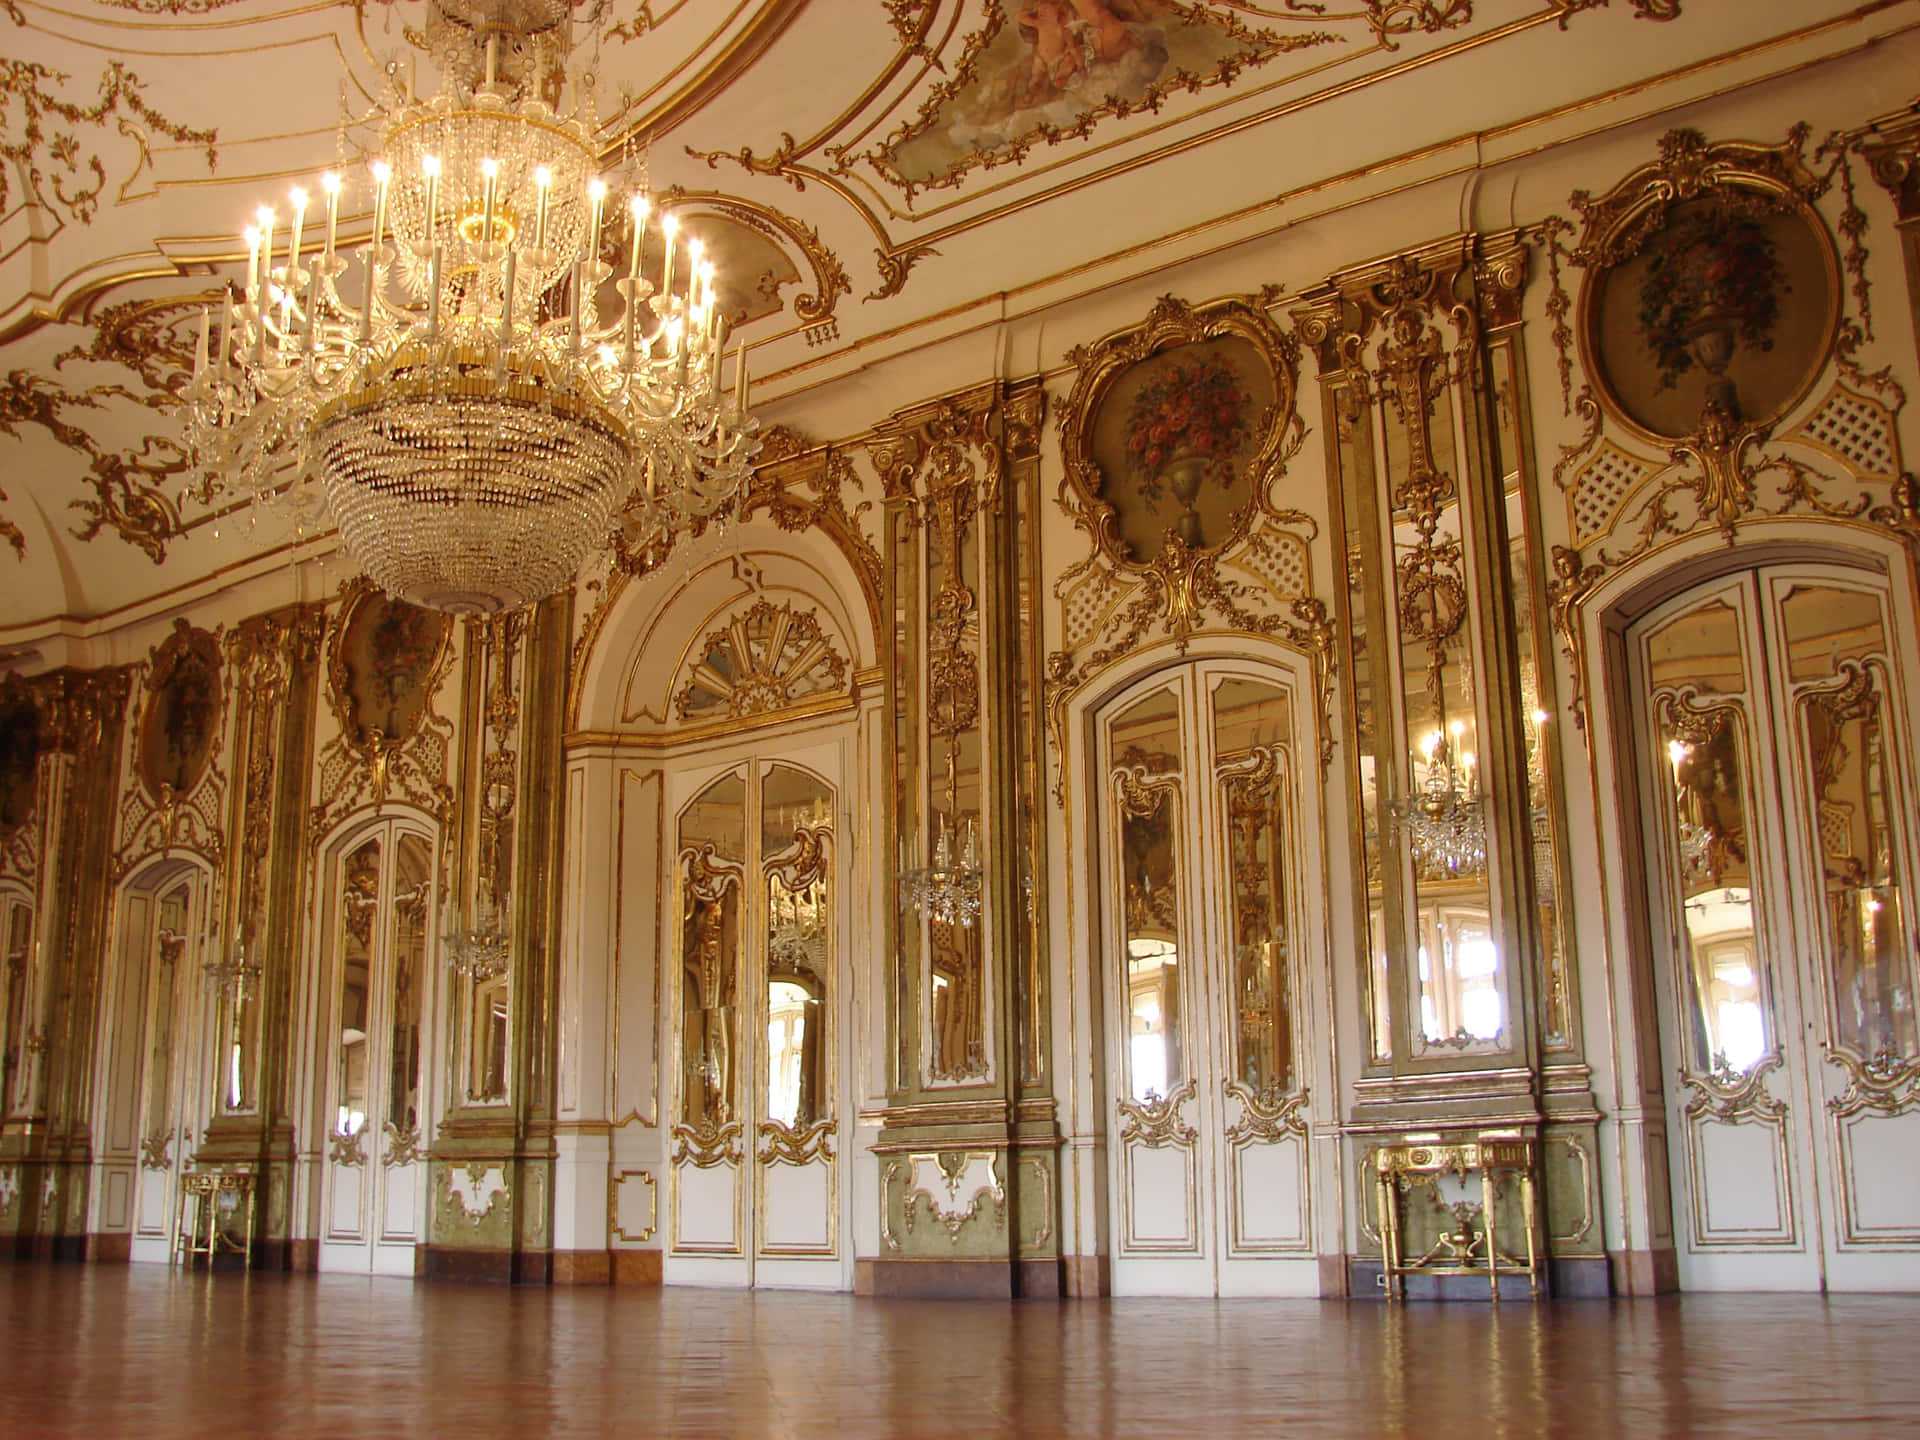 A Large Room With Gold Walls